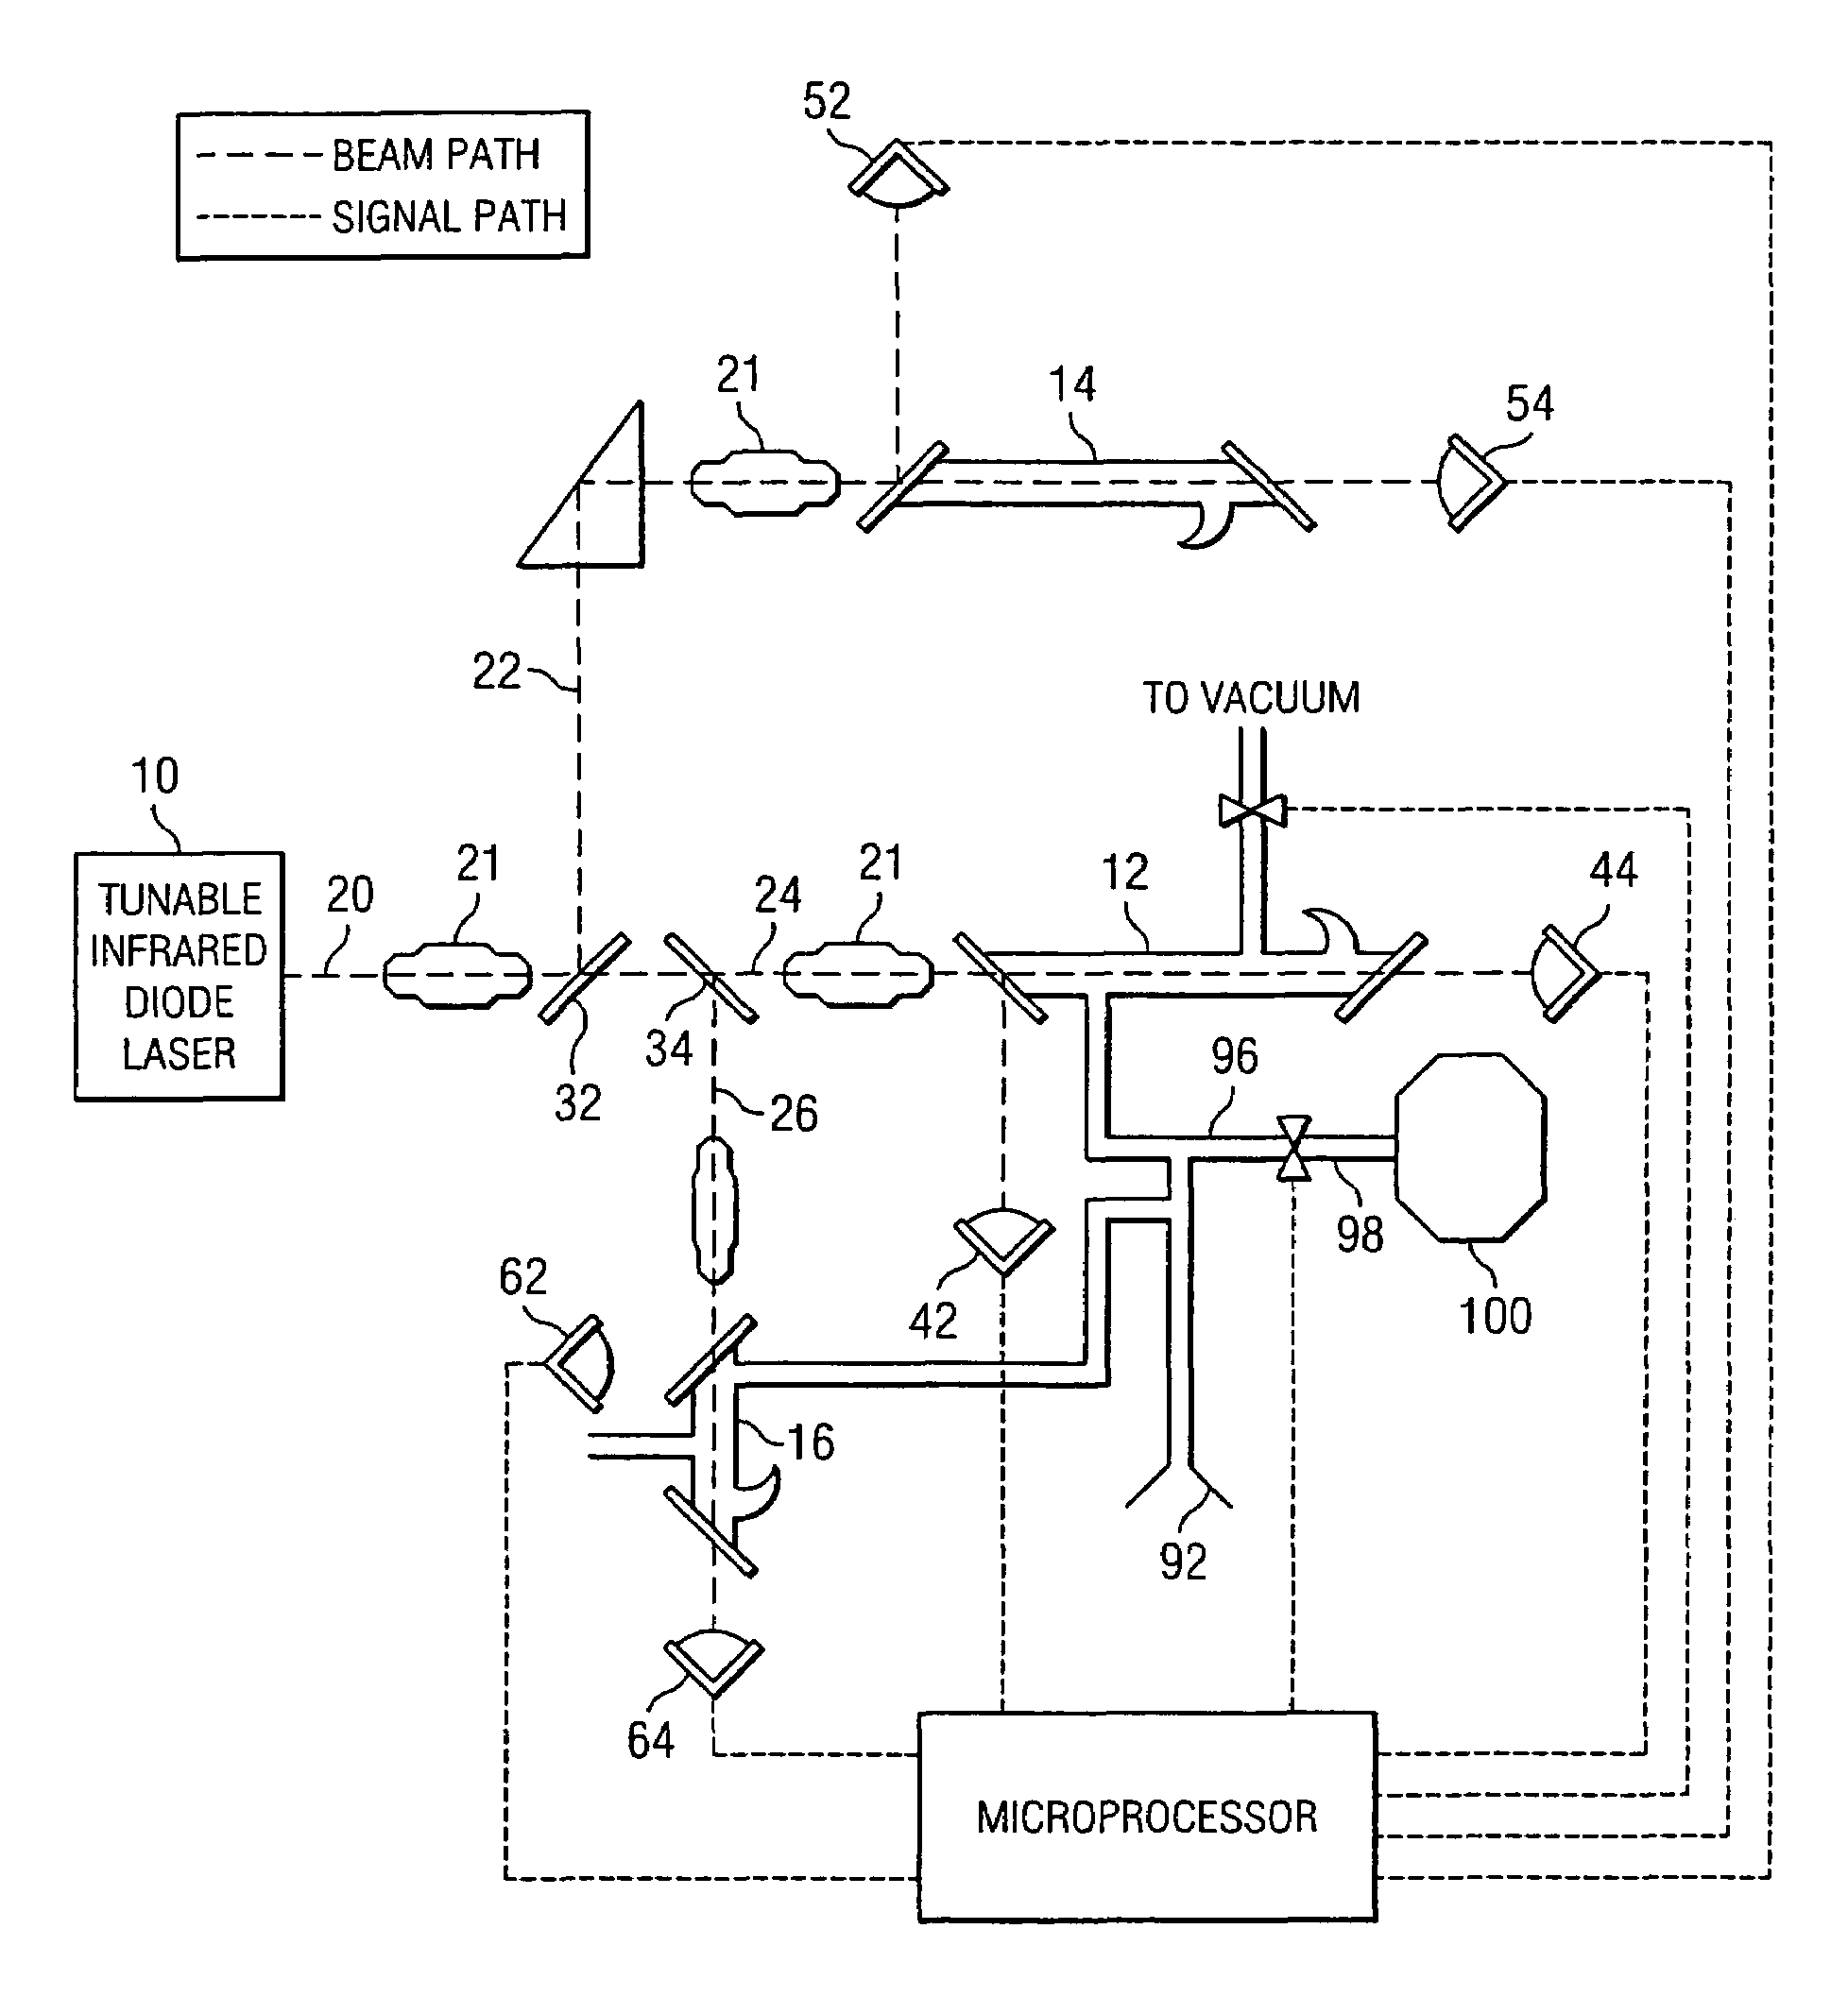 Method and apparatus for performing rapid isotopic analysis via laser spectroscopy